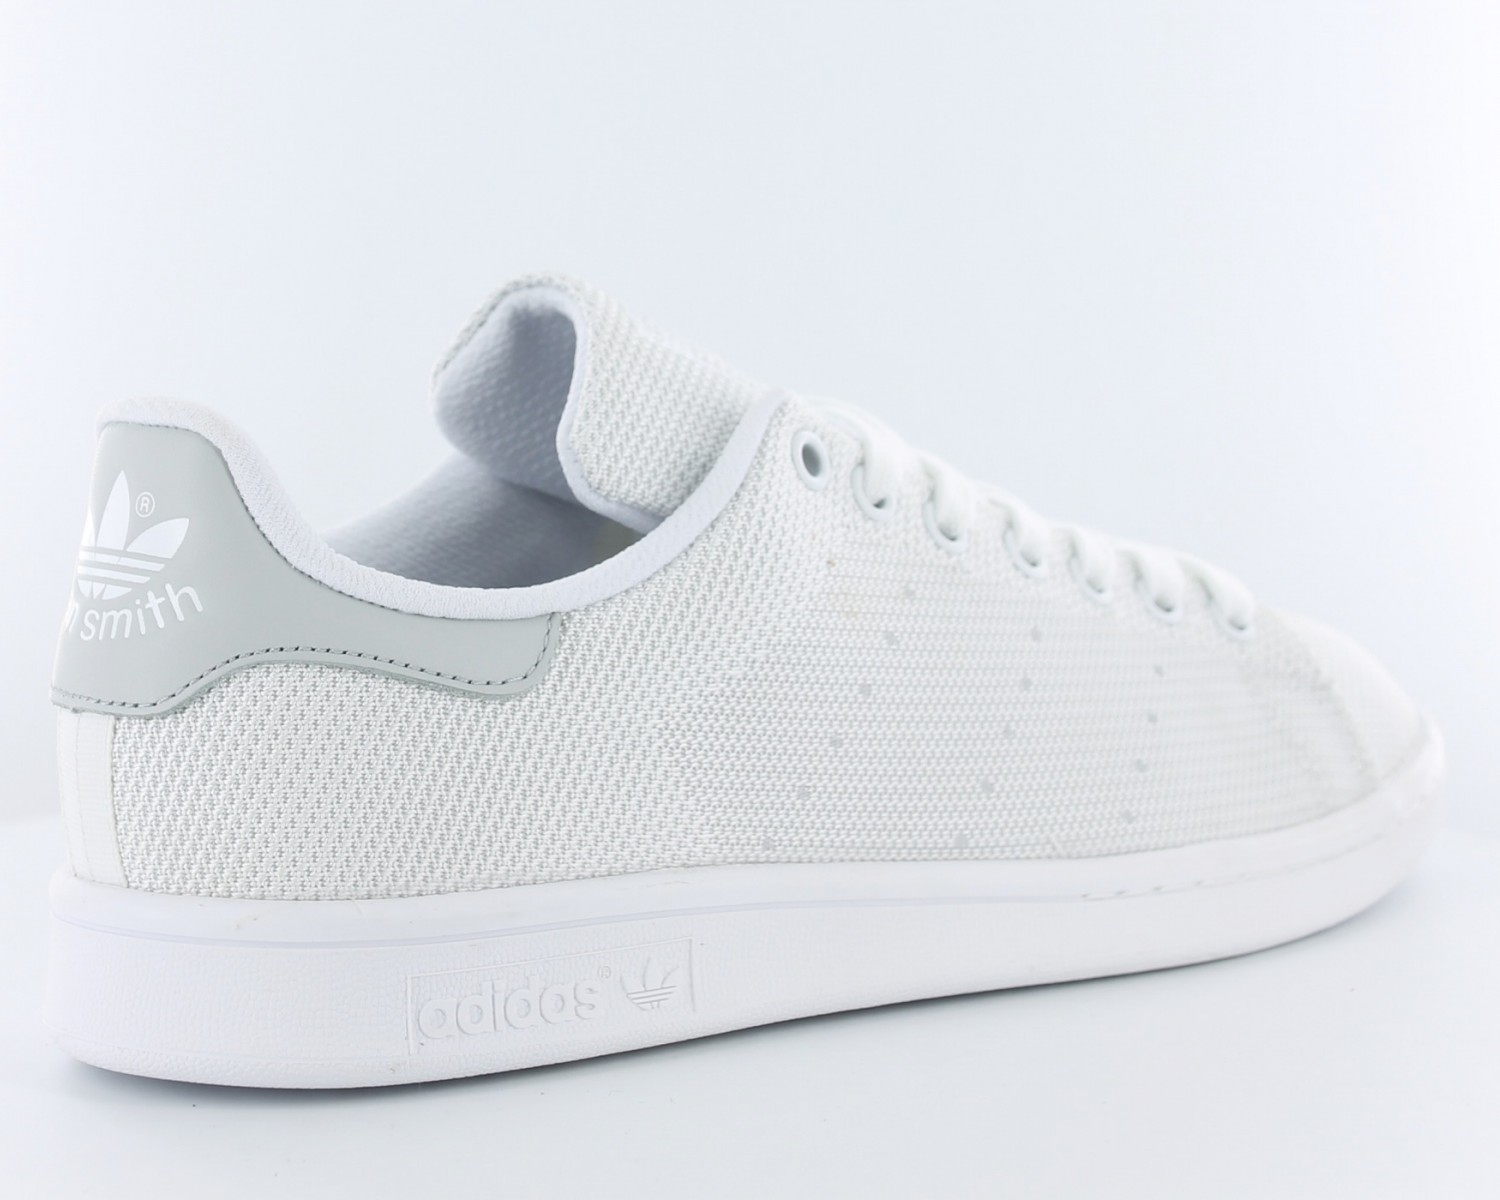 stan smith grise